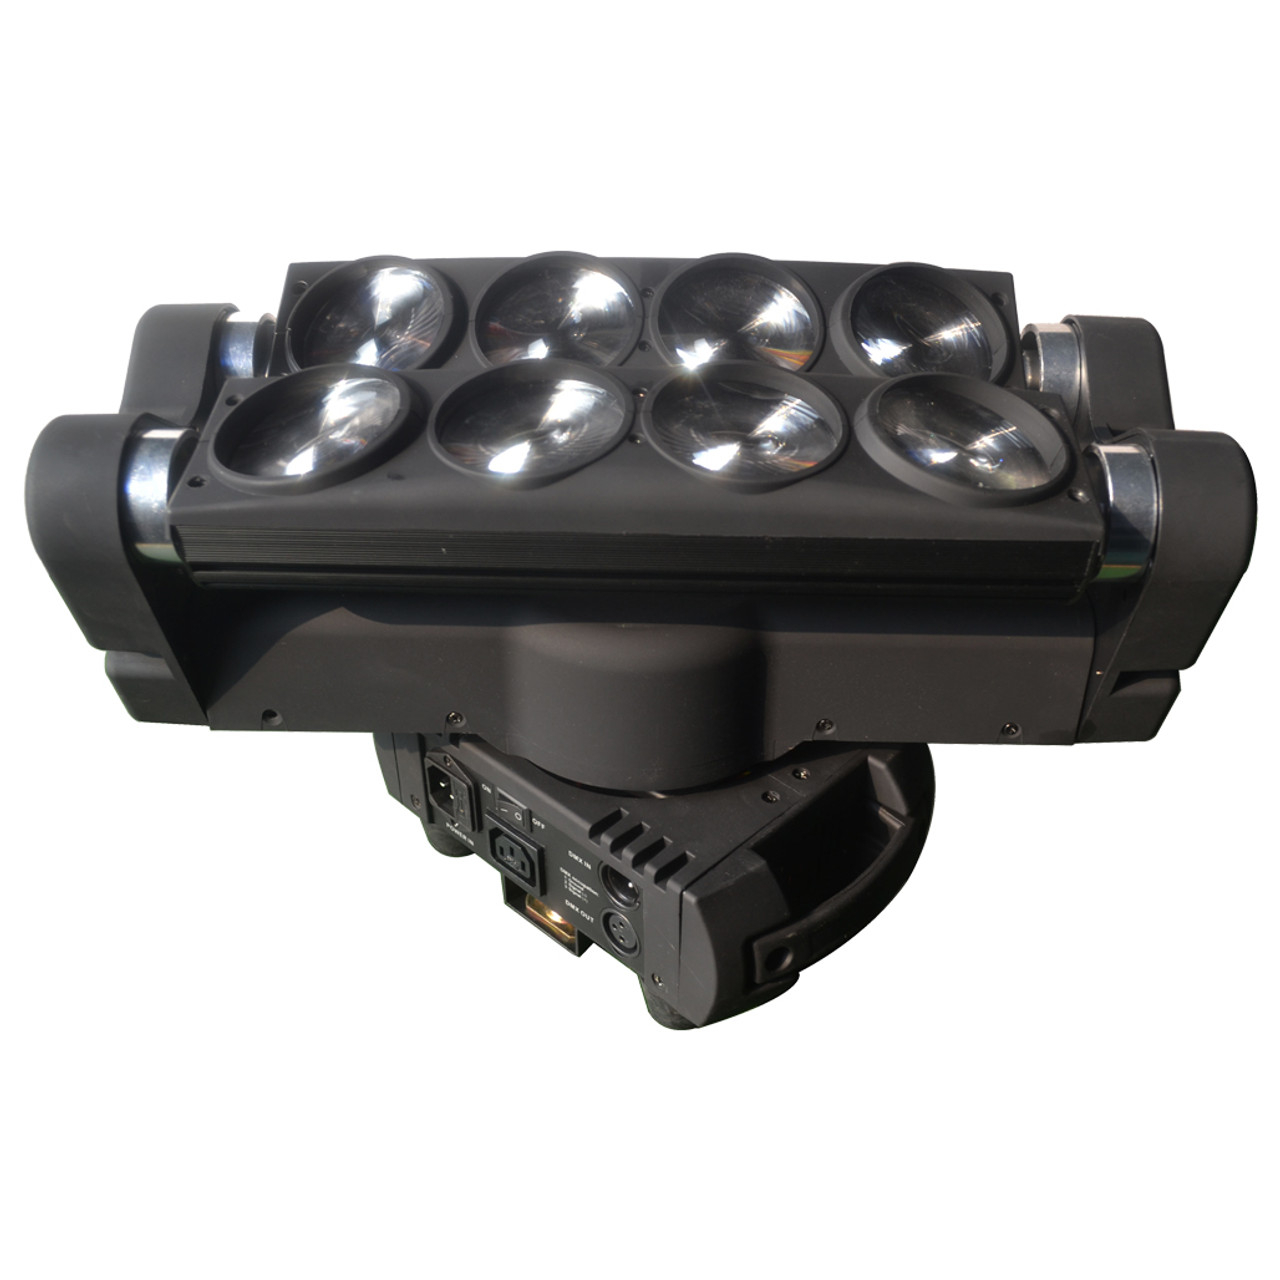 LED Beam 8 x 12W Spider Moving Head Light (A36)